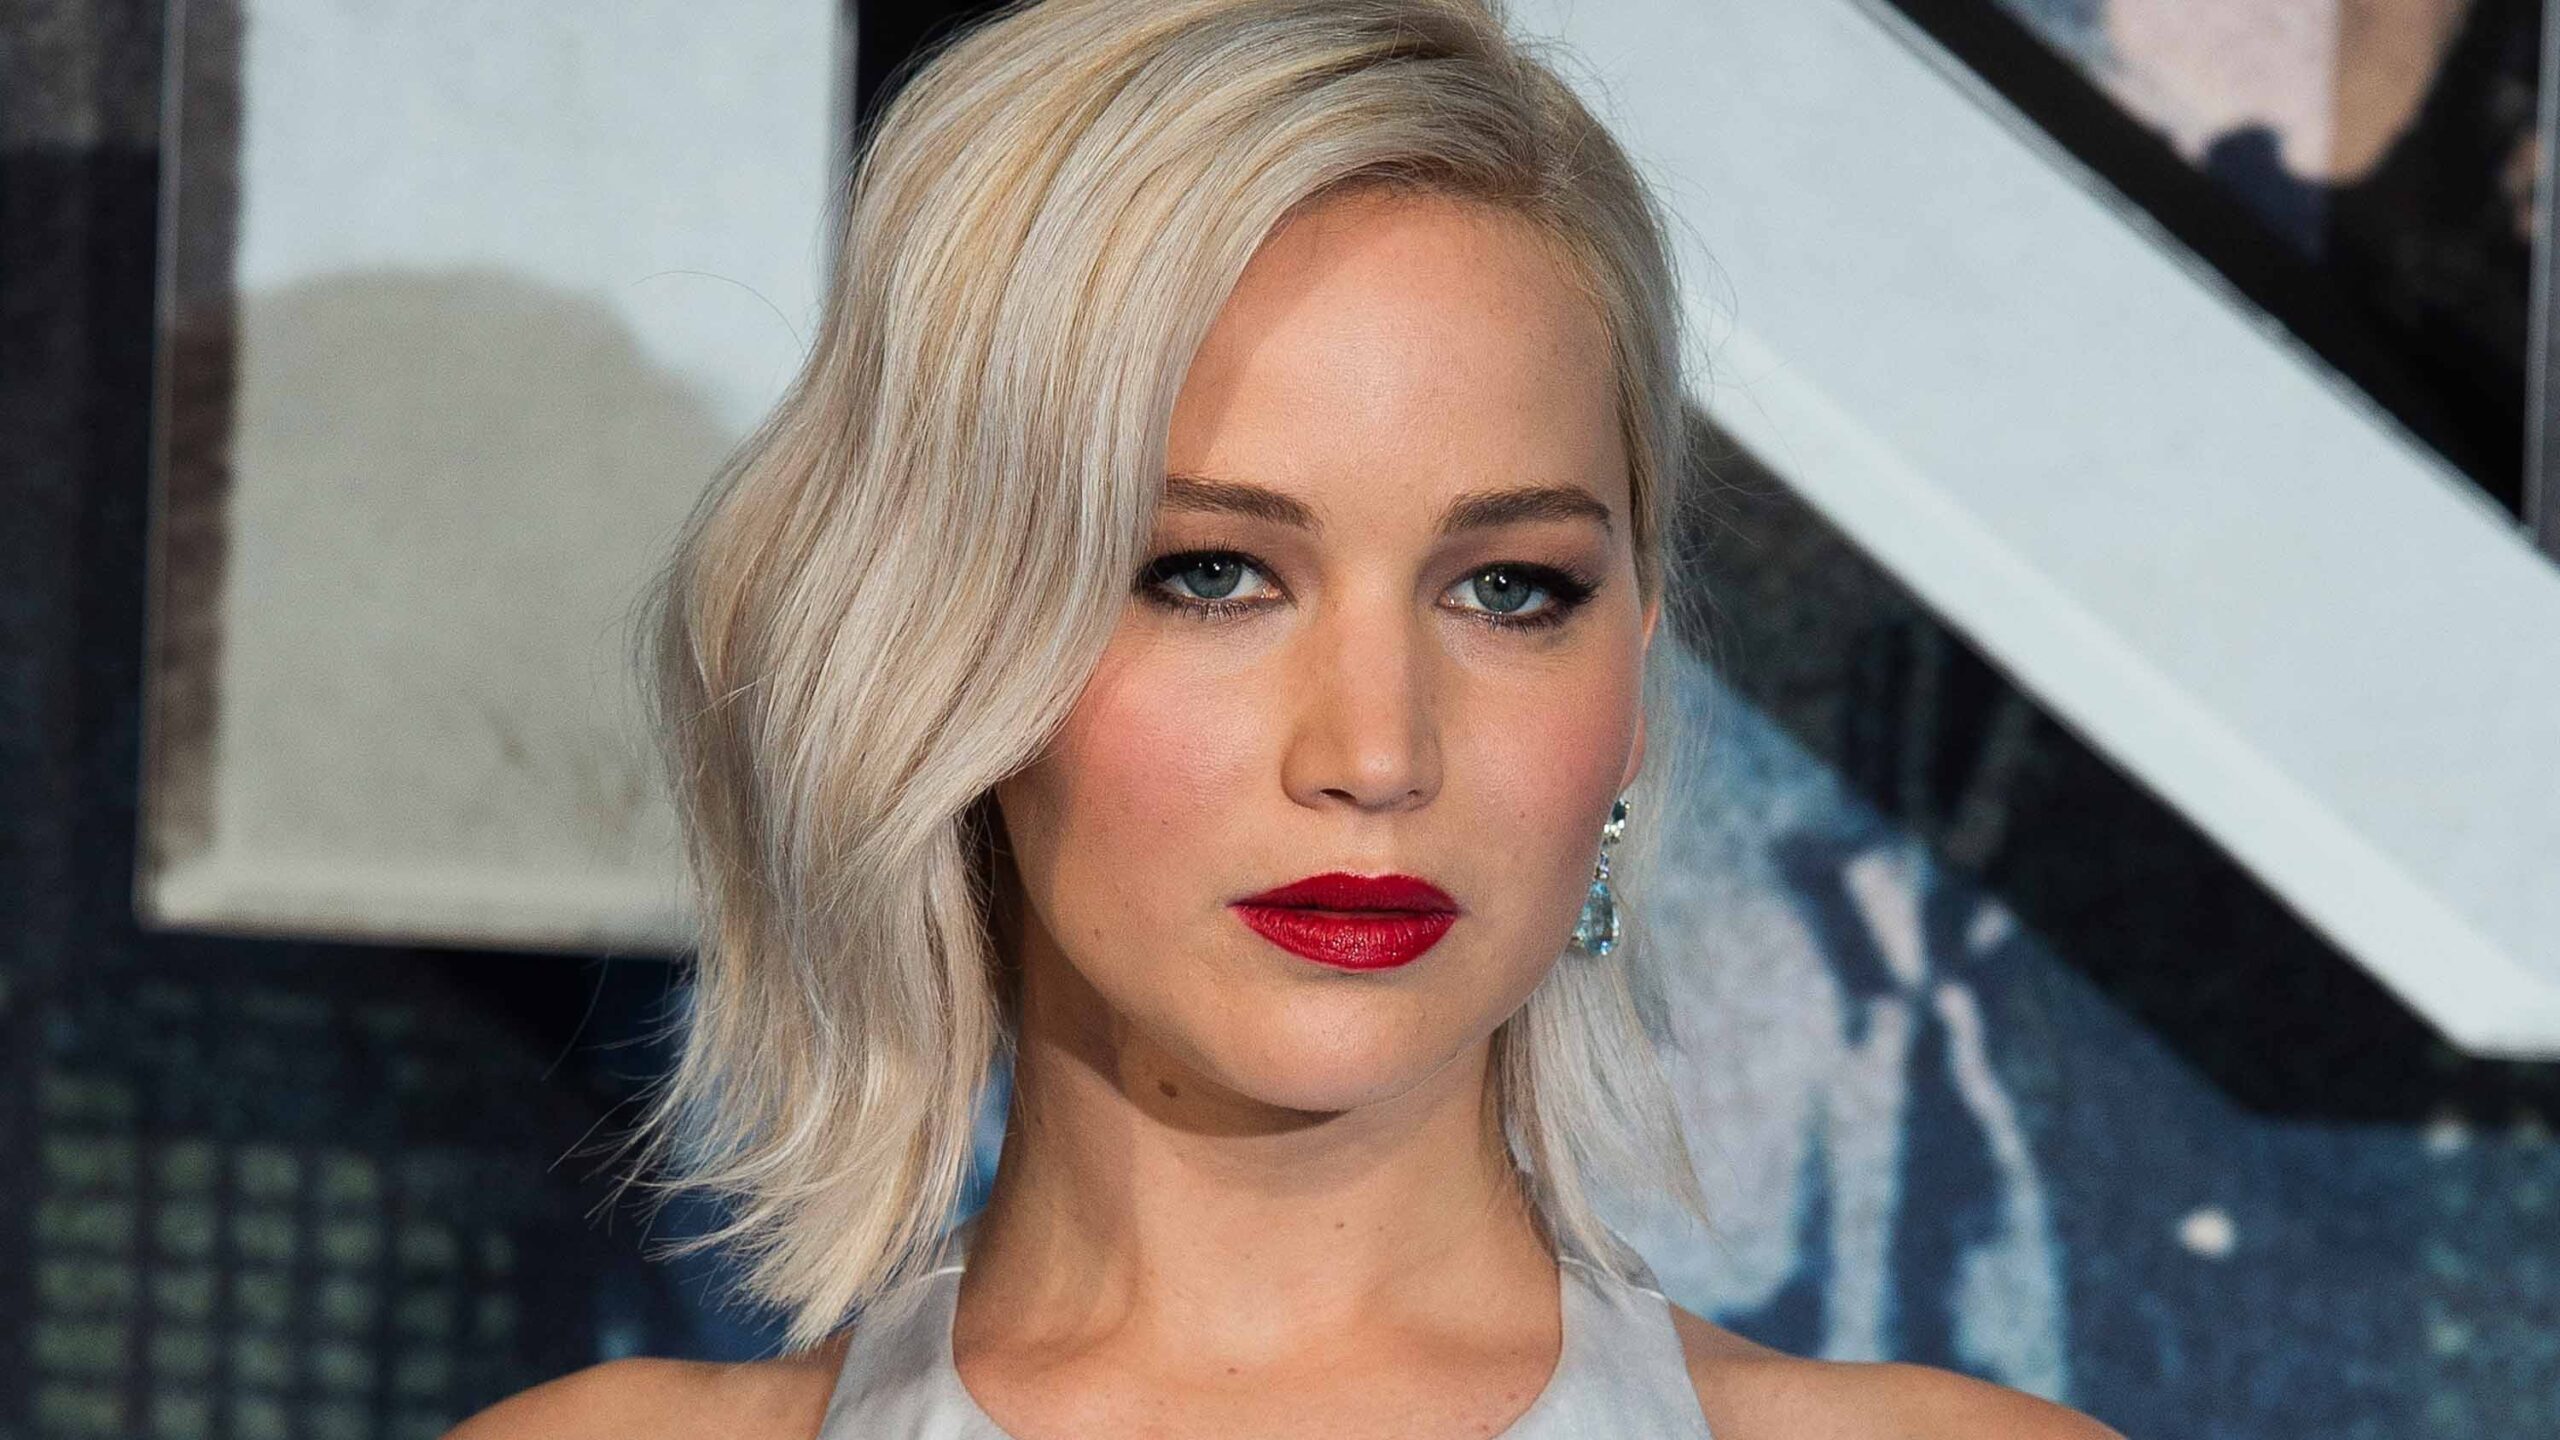 Jennifer Lawrence tops ‘Forbes’ ‘Highest-Paid Actresses 2016’ list